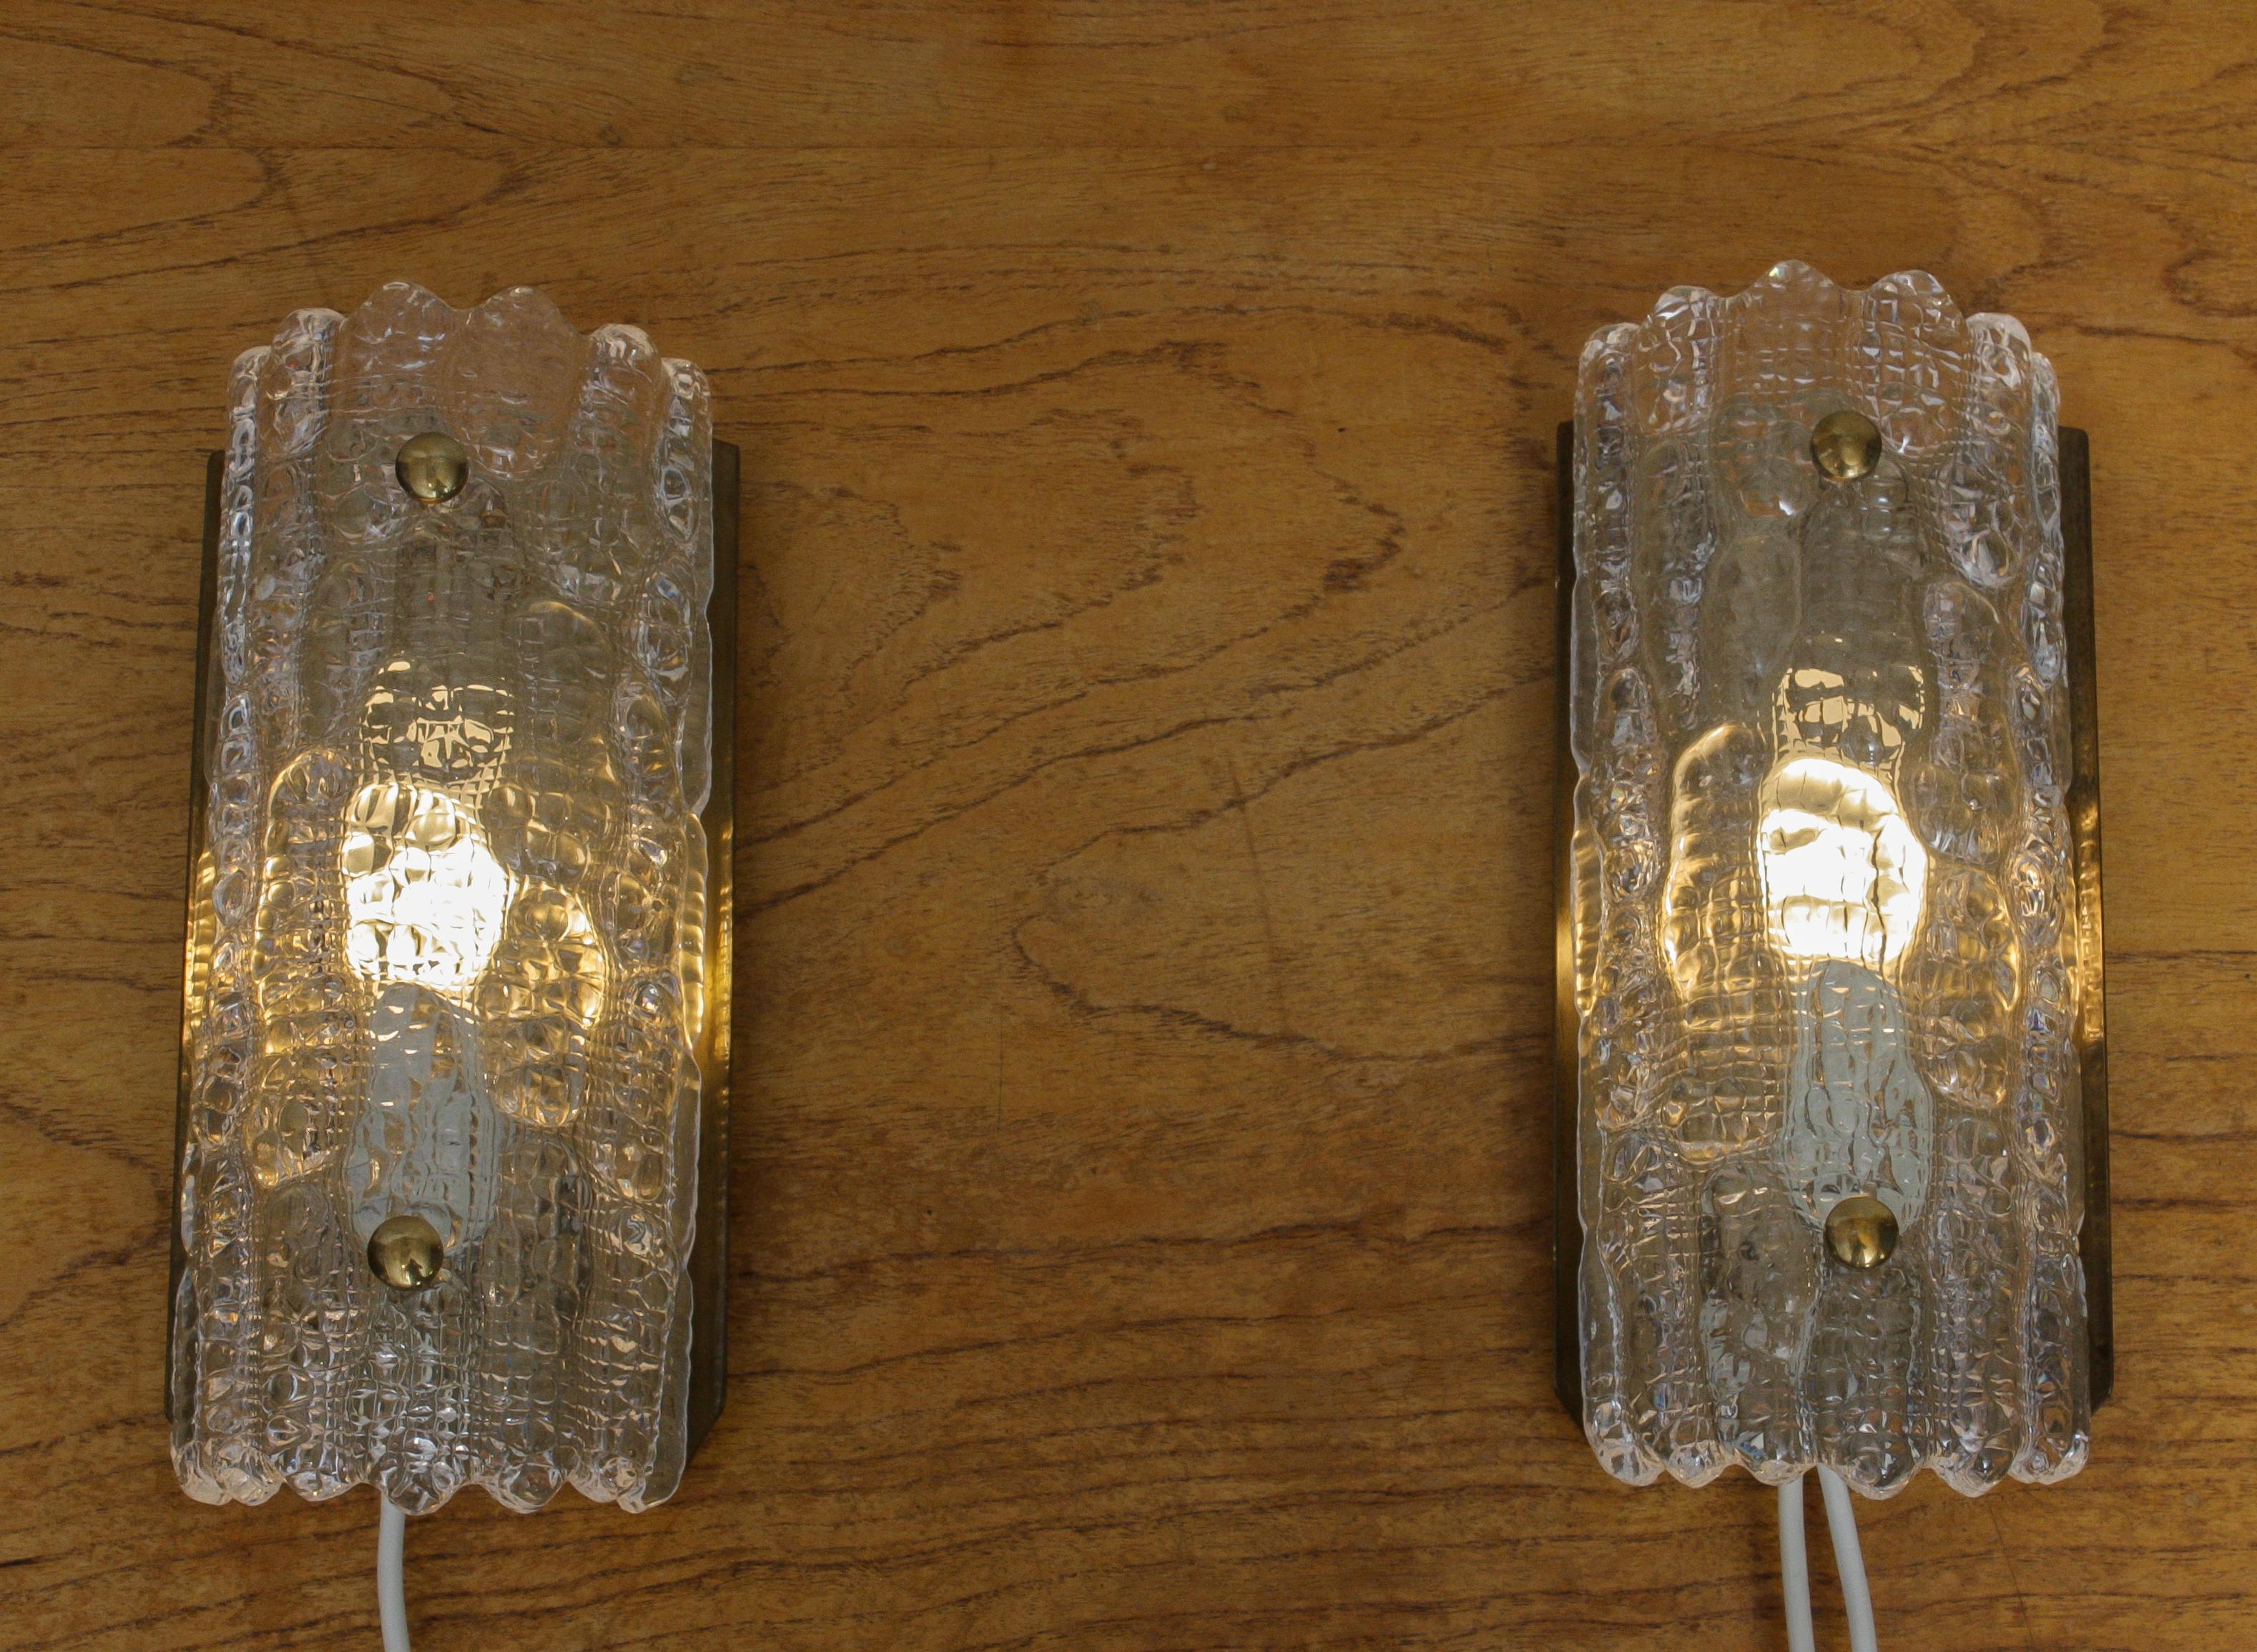 Set of two beautiful scones / wall lights designed by Carl Fagerlund for Orrefors, Sweden, 1960s.
Both scones are in perfect condition. Suits E14 / E17 bulbs for 110 / 230 volts.
Measurements are:
Height 30cm / 12 inch
Wide 12 cm / 5 inch.